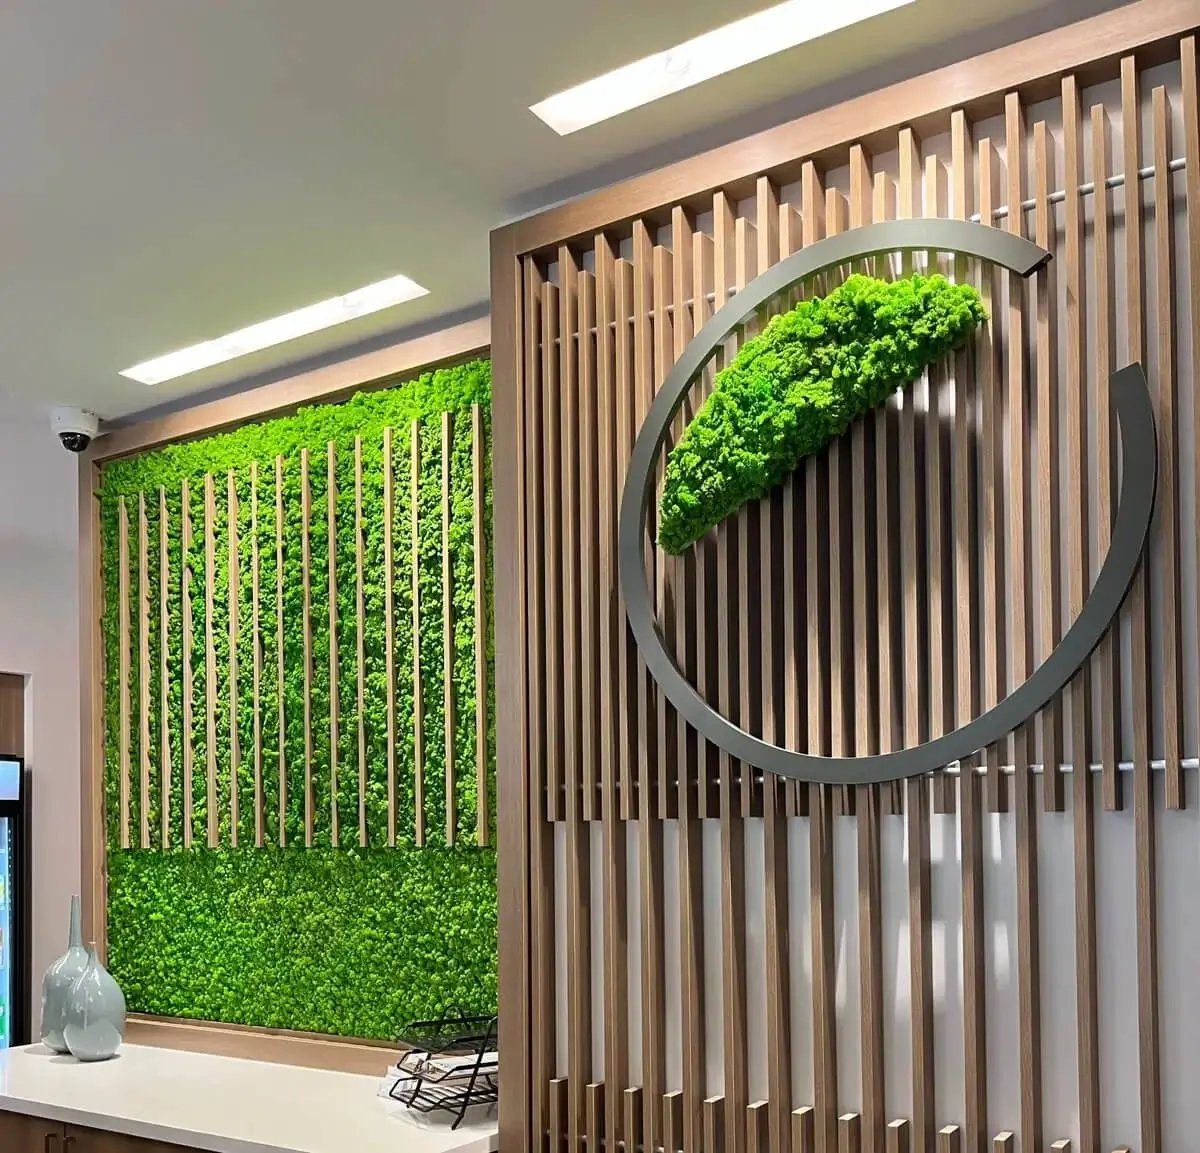 Element Hotel with moss walls at the reception desk